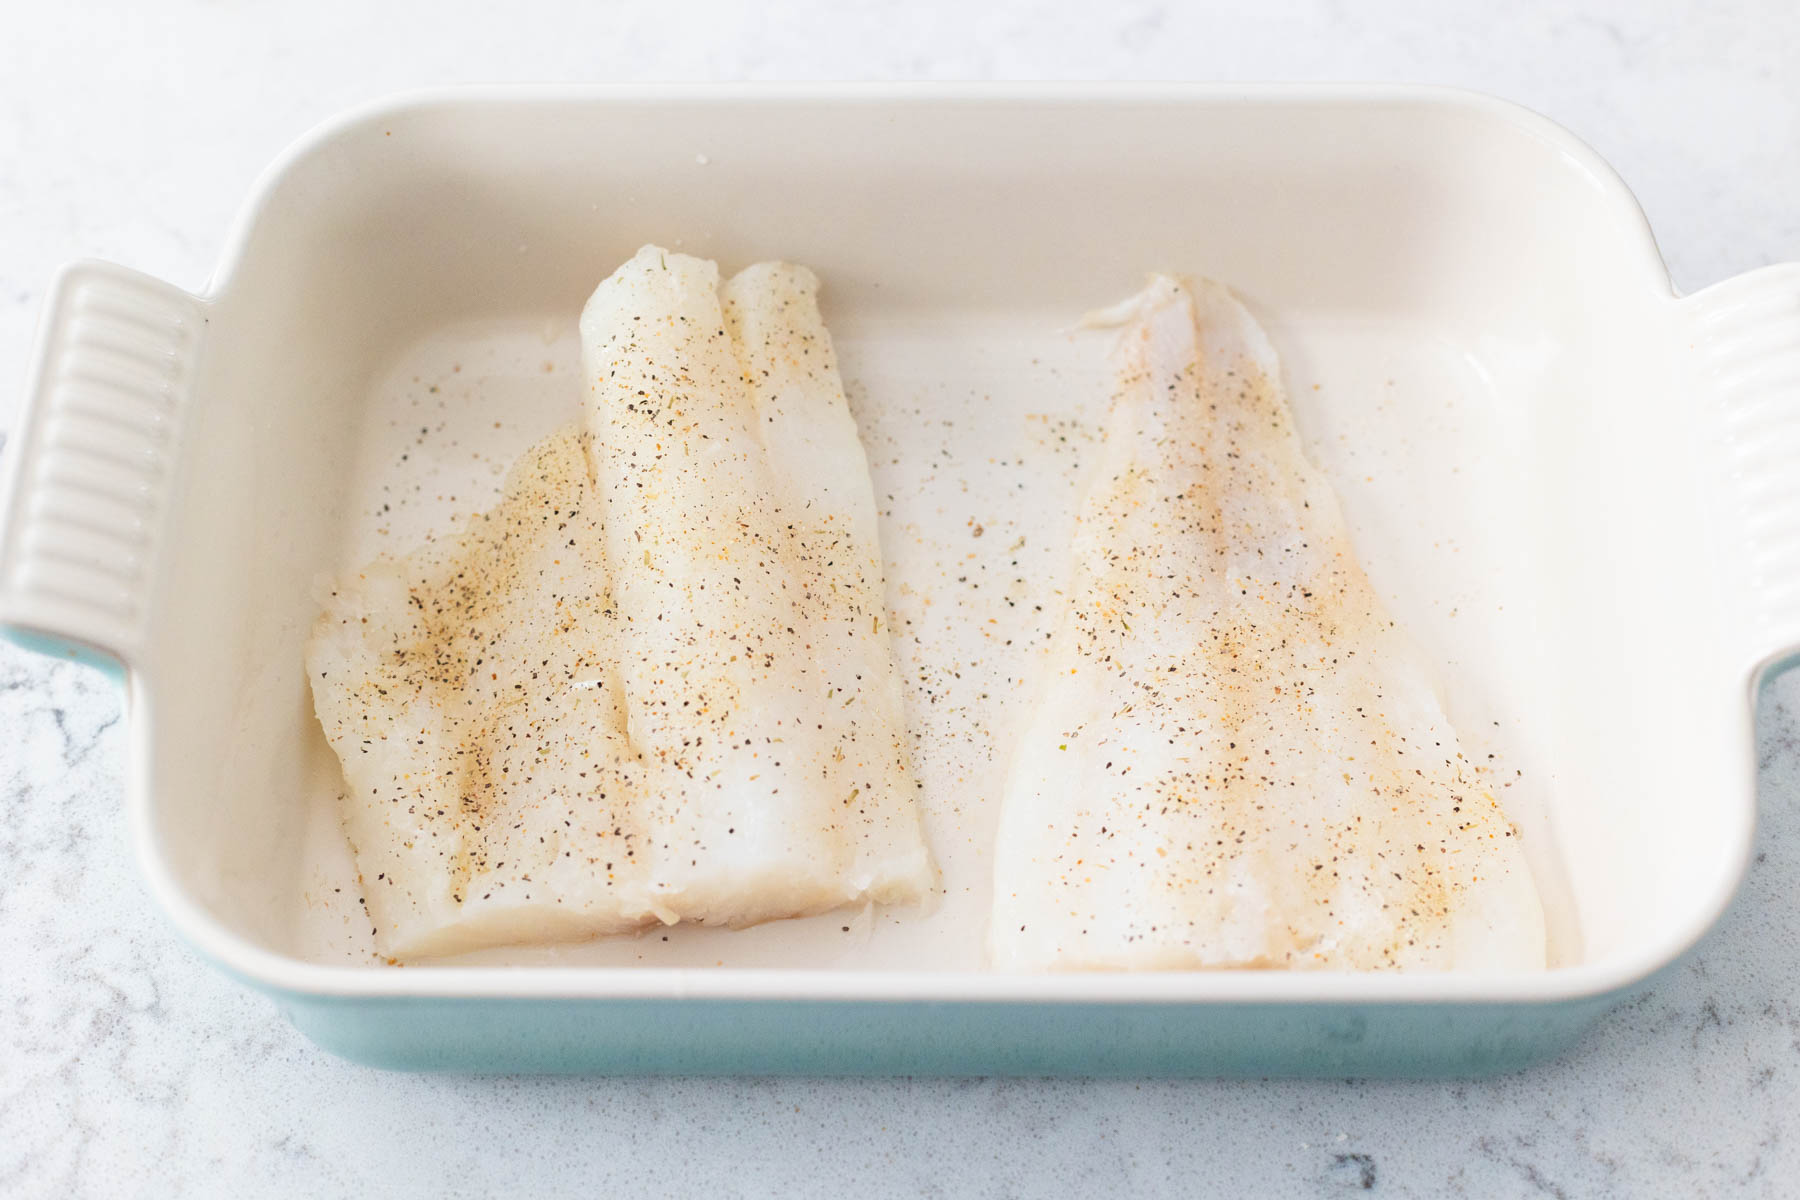 The cod filets are in a baking dish and seasoned.